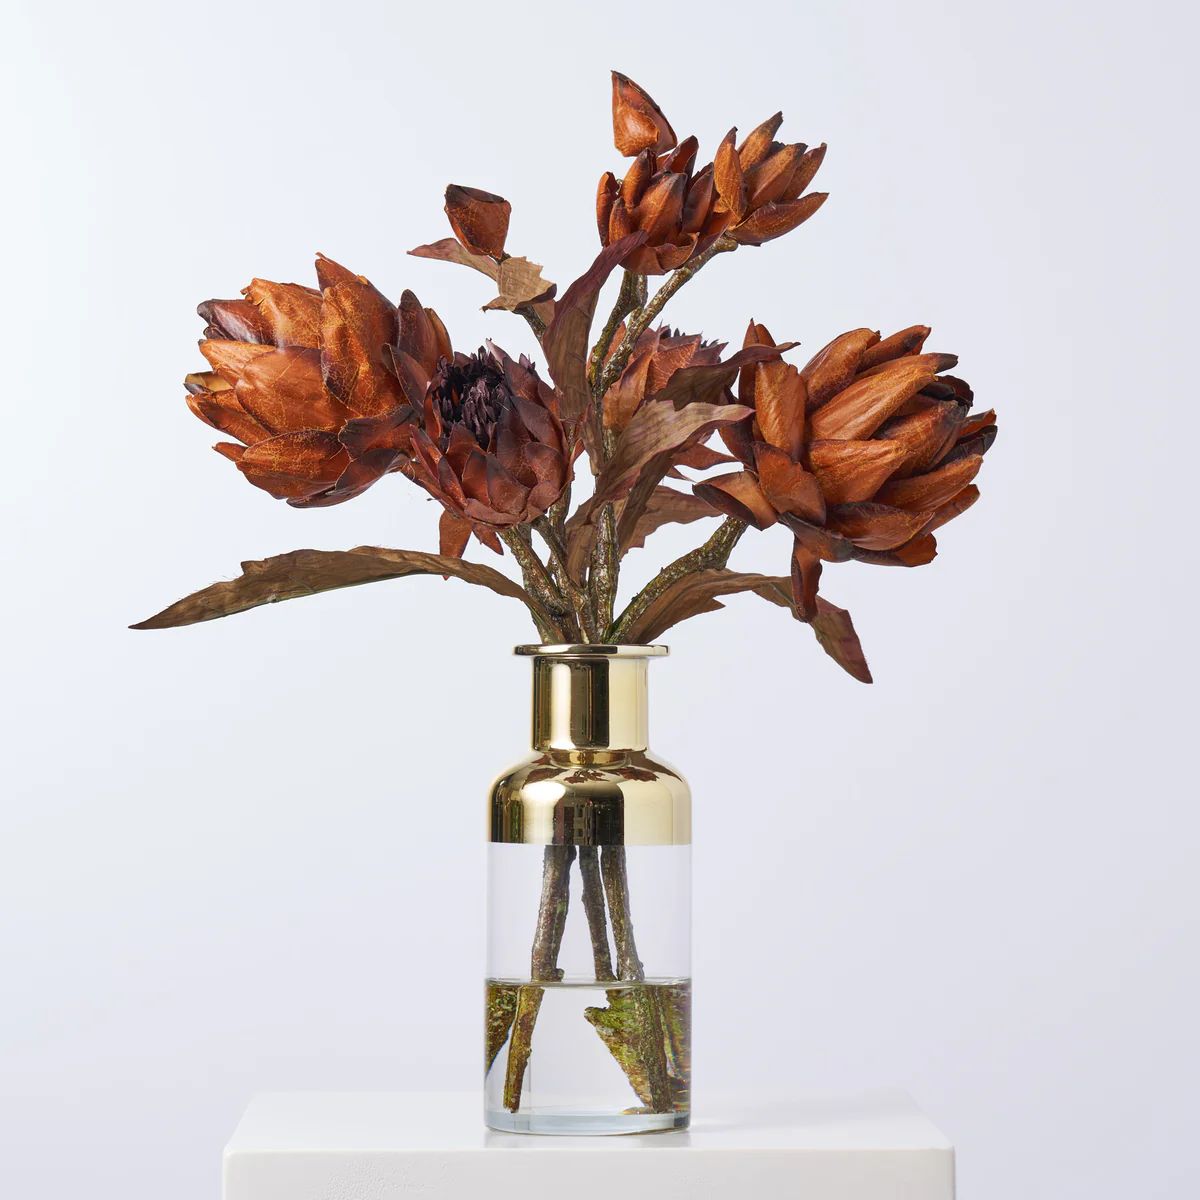 Rustic Brown Dried Look Artichoke Stems Fall Floral Arrangement In Gold Dipped Bottle Vase | Darby Creek Trading